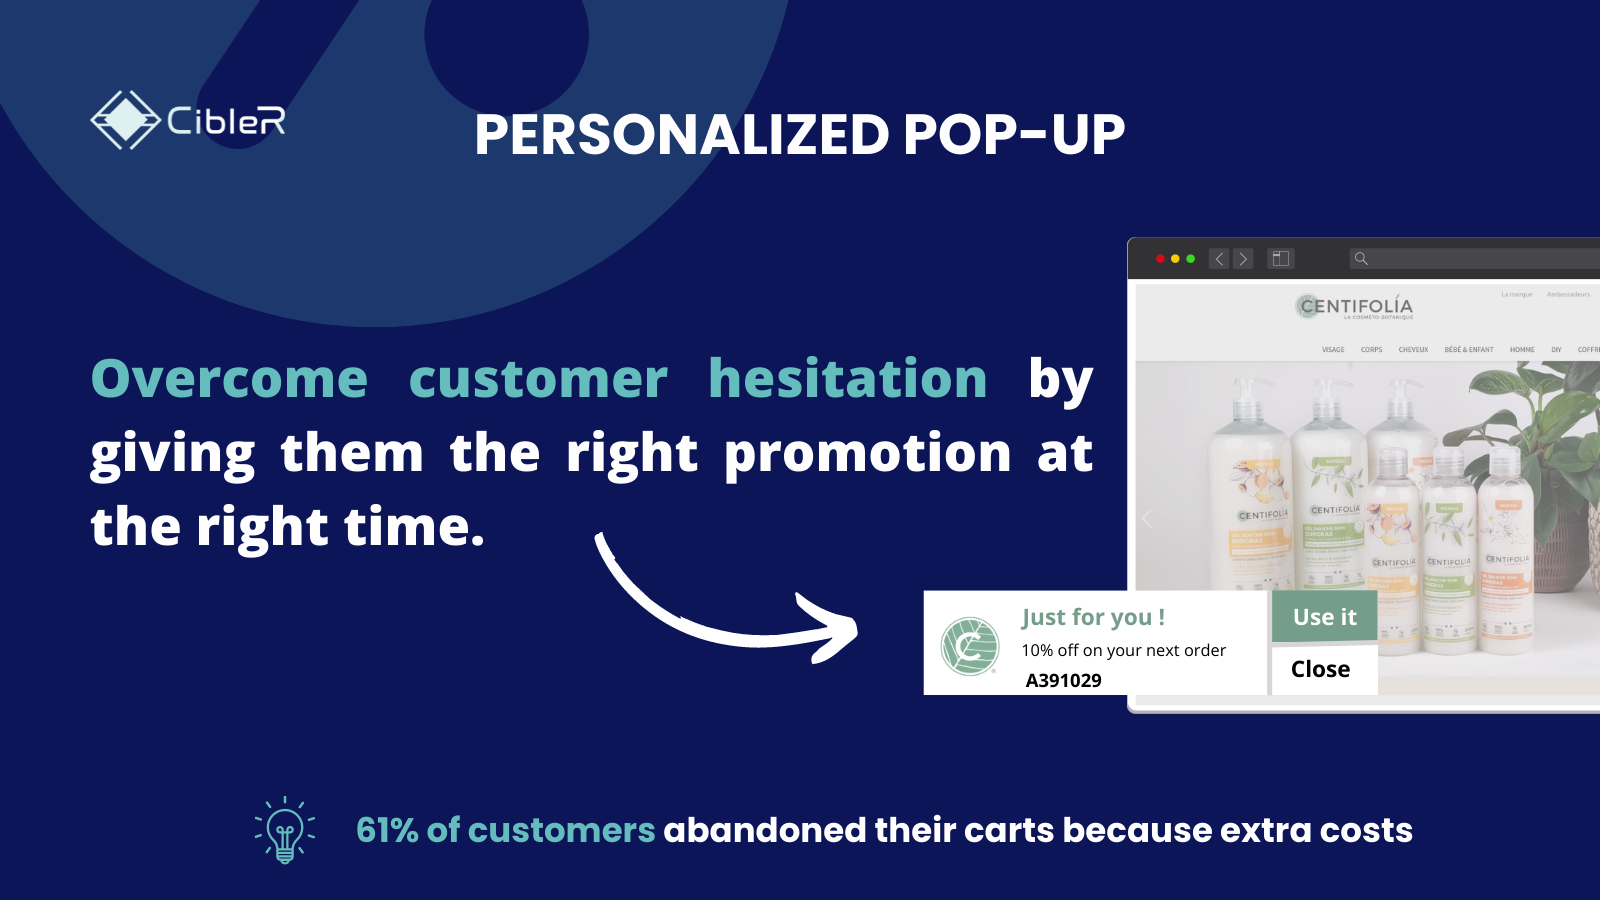 Personnalized Pop-up